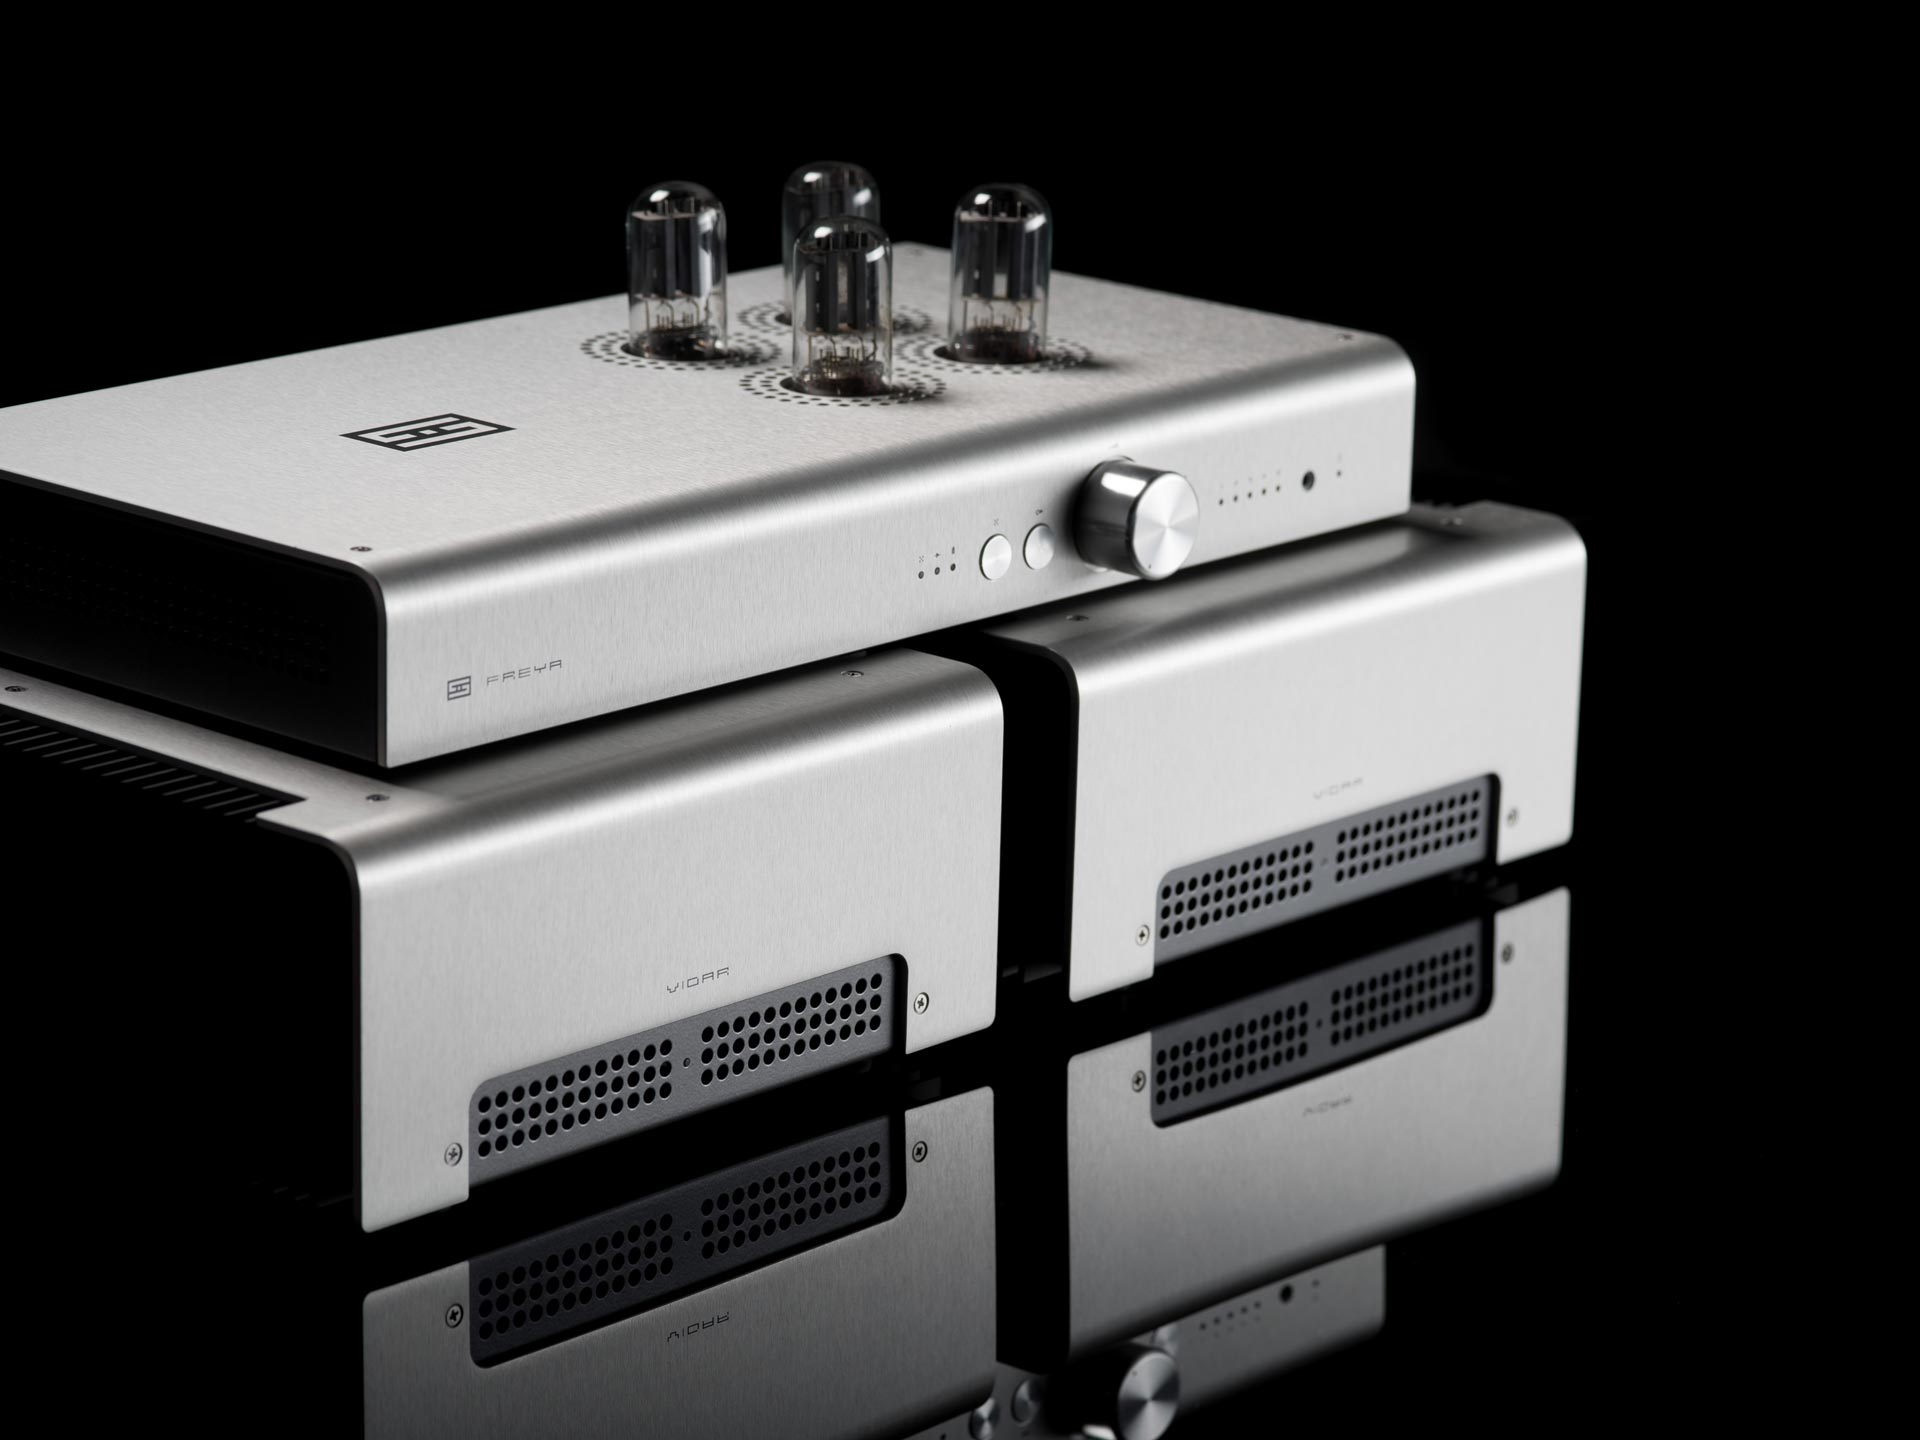 Schiit Happened: The Story of the World's Most Improbable Start-Up